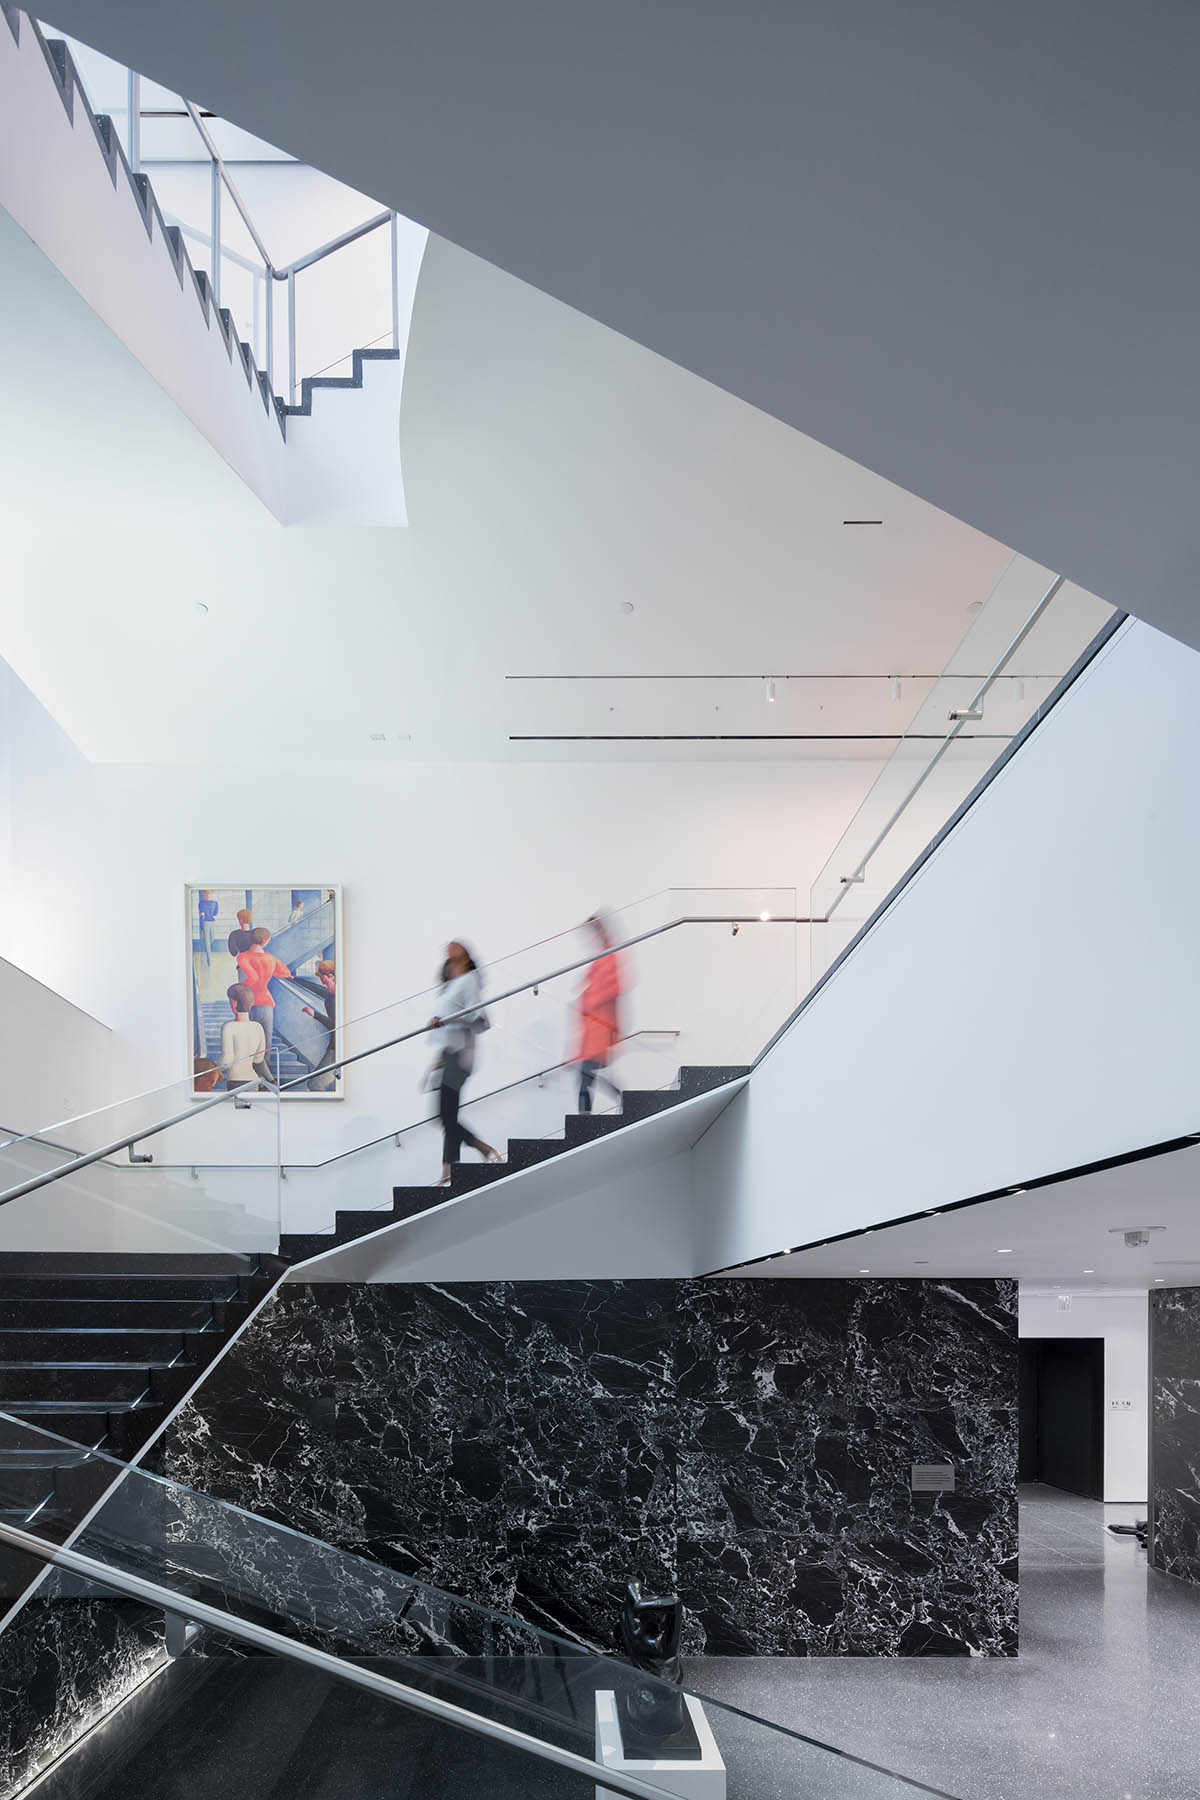 Diller Scofidio + Renfro completes first phase of renovation for MoMA galleries and public